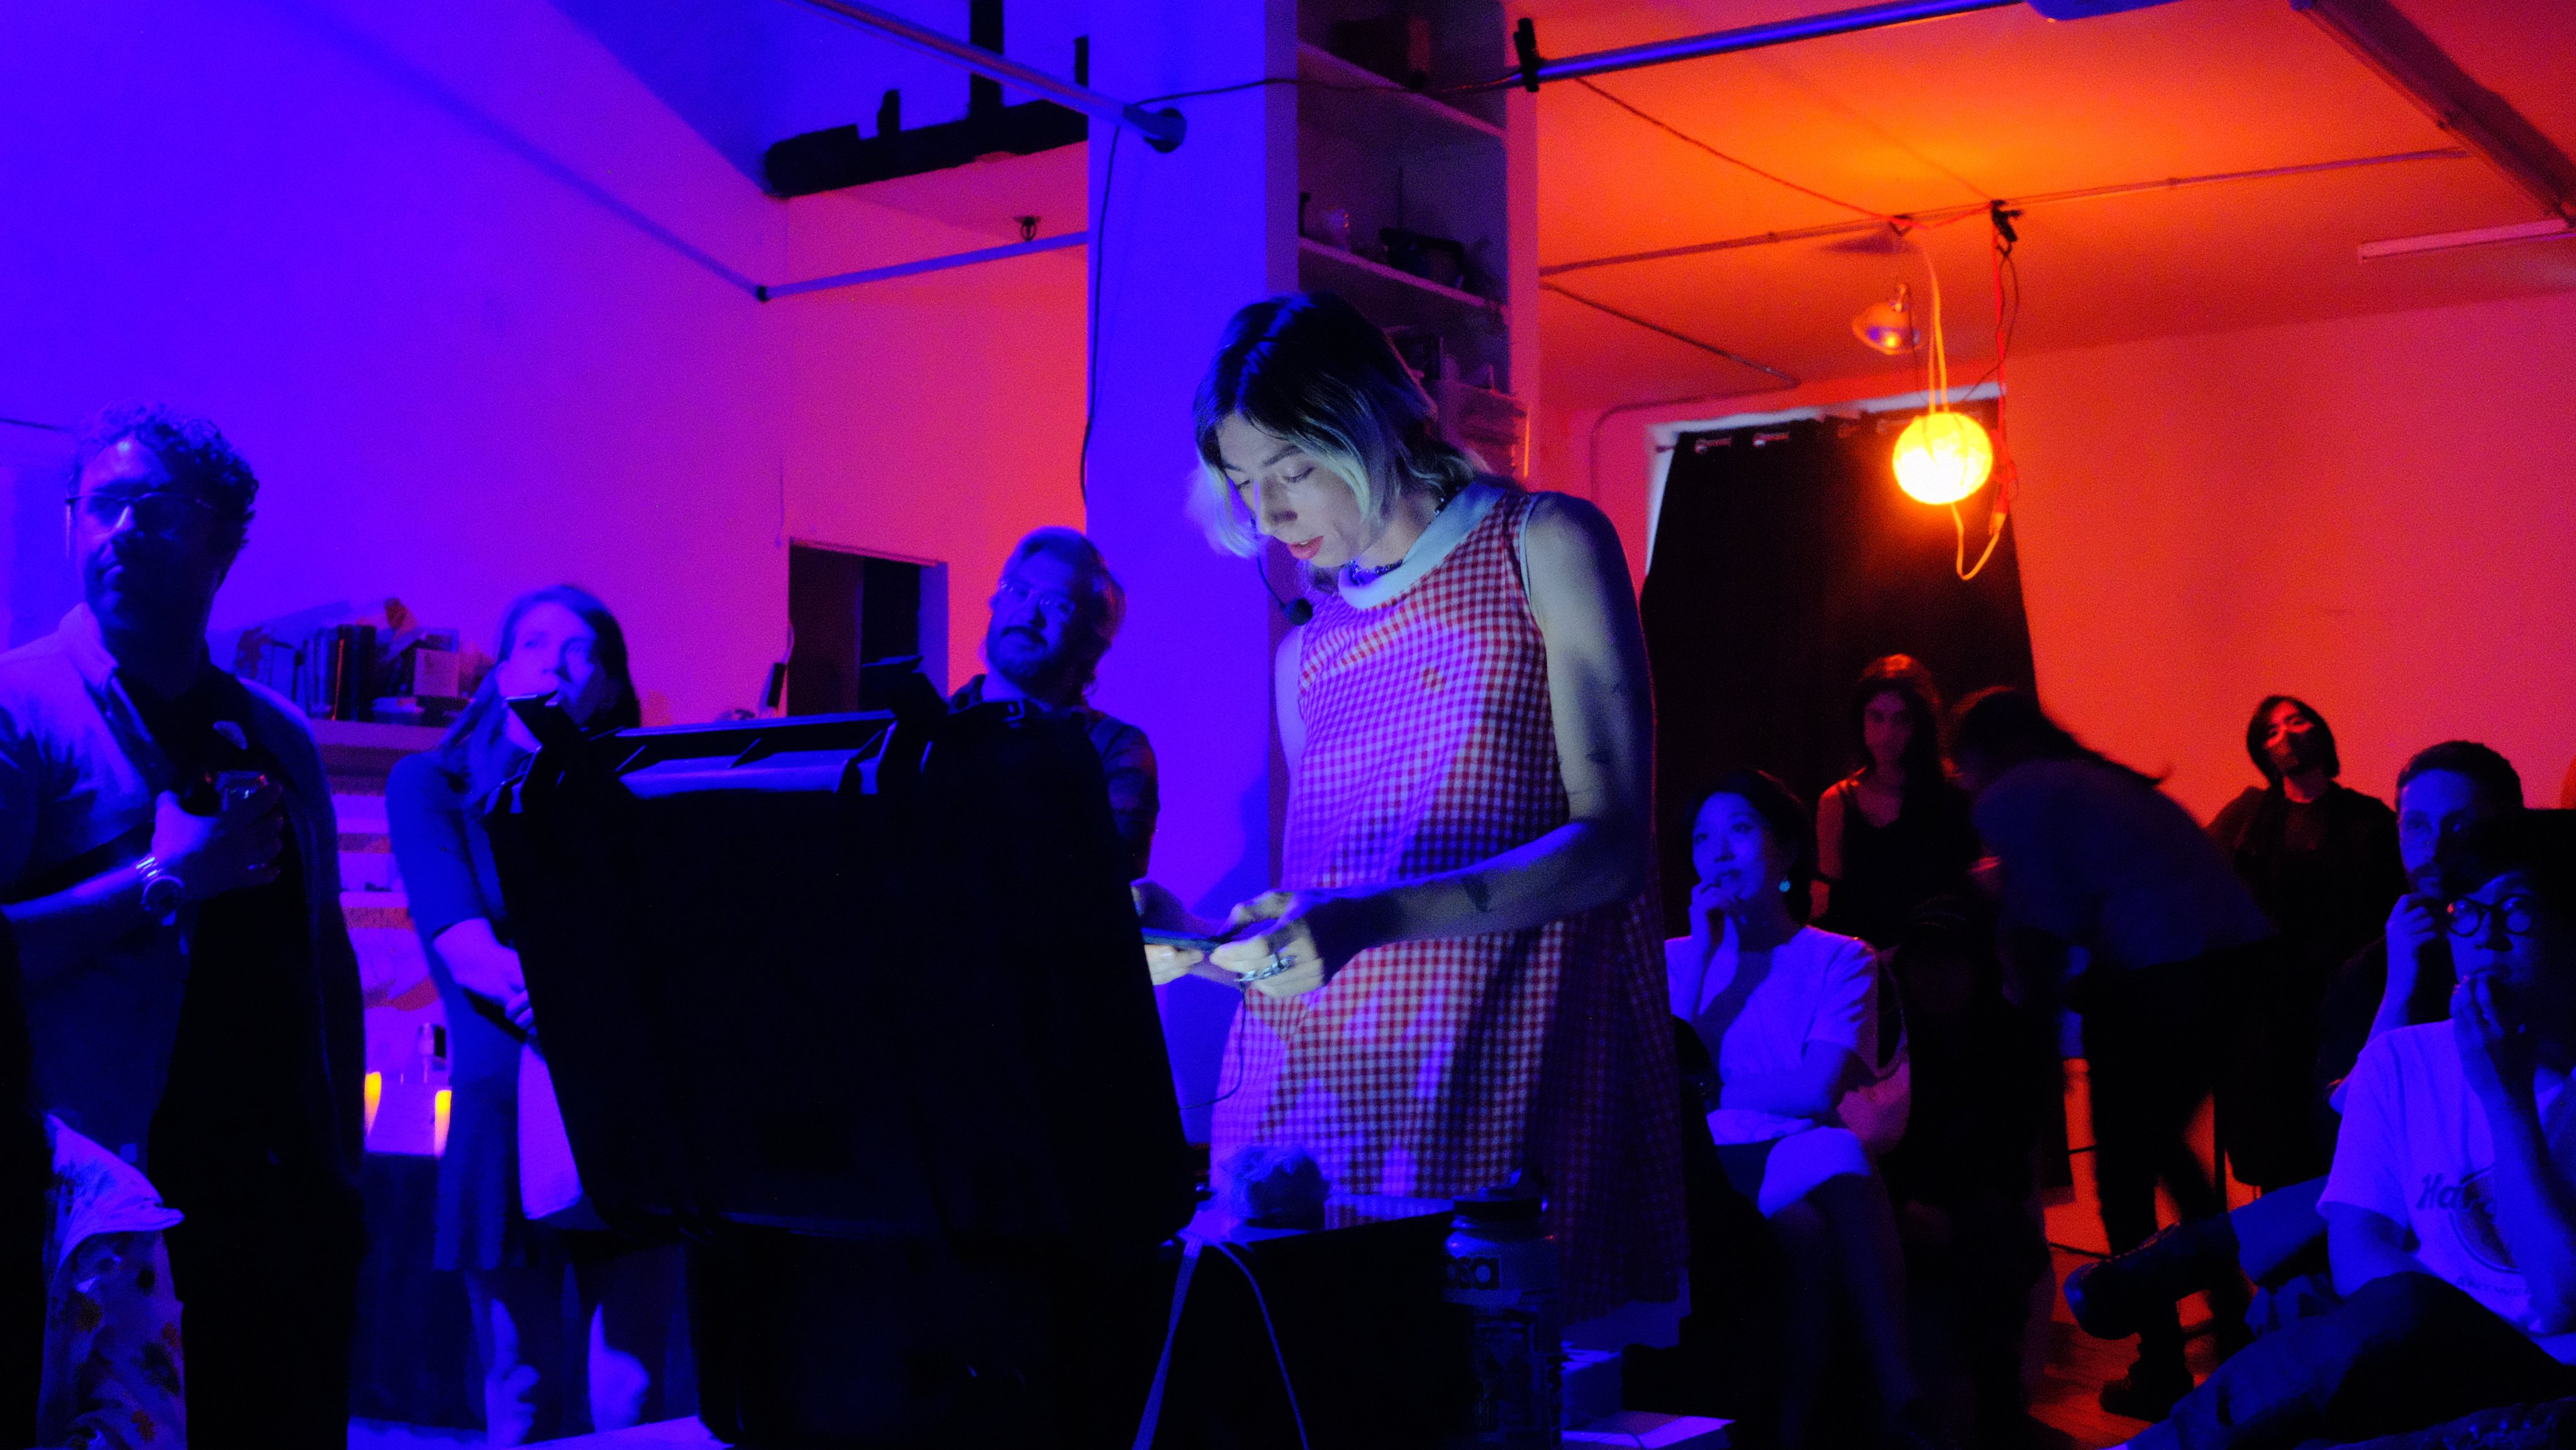 A trans woman (me) wearing a red gingham a frame dress stands smiling behind an open Pelican case in a dark room surrounded by people and lit in dramatic blue.